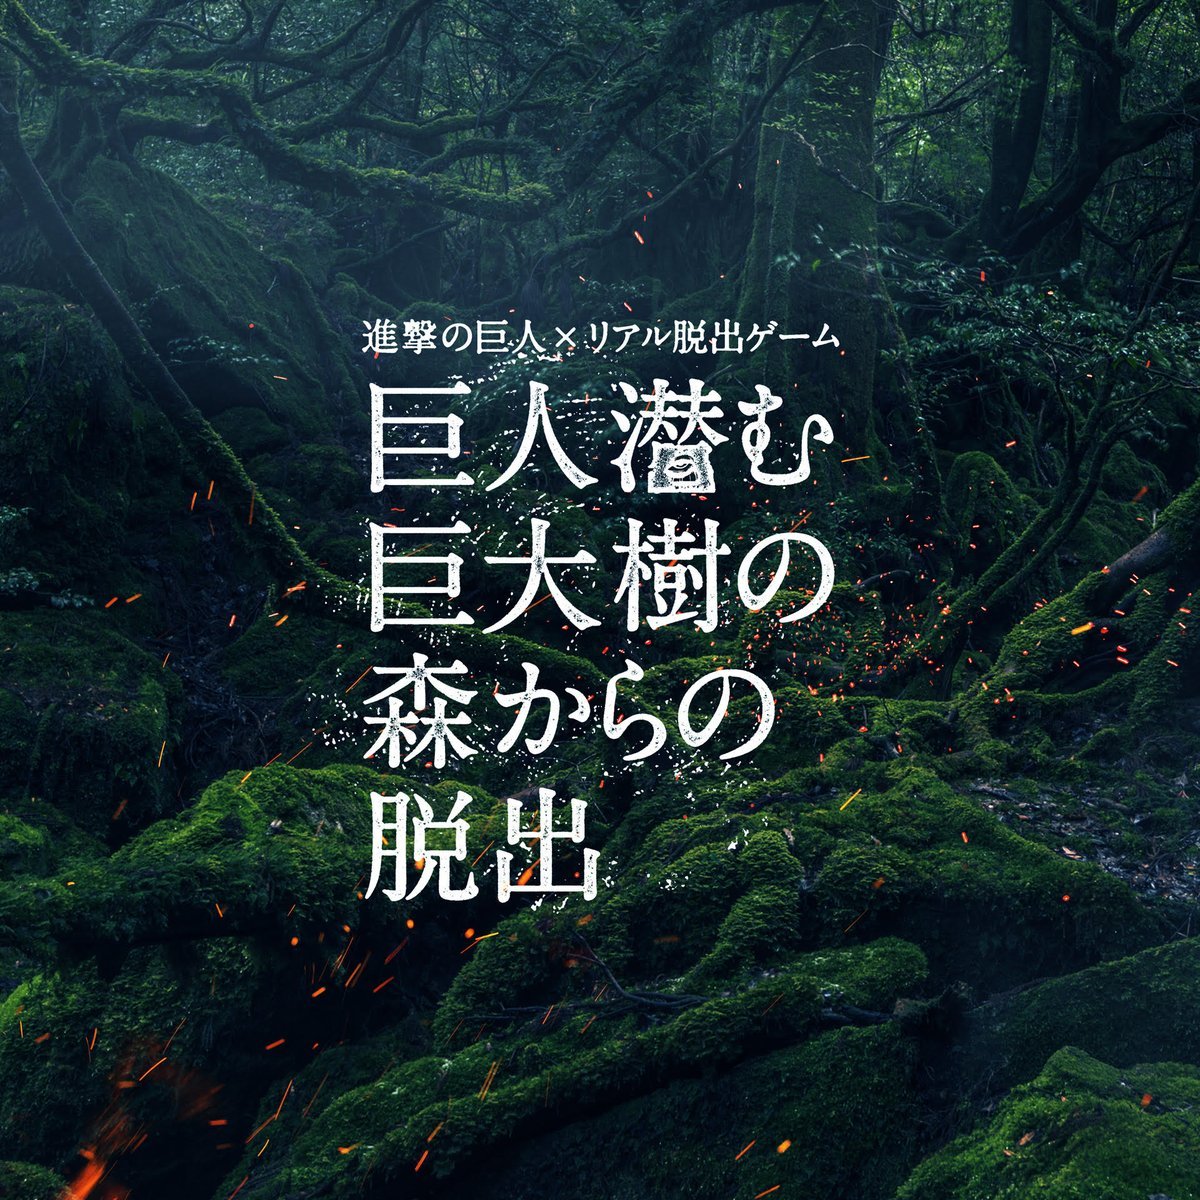 SnK News: New Real Escape Game “The Titan that Lurks in the Forest of Giant Trees”From